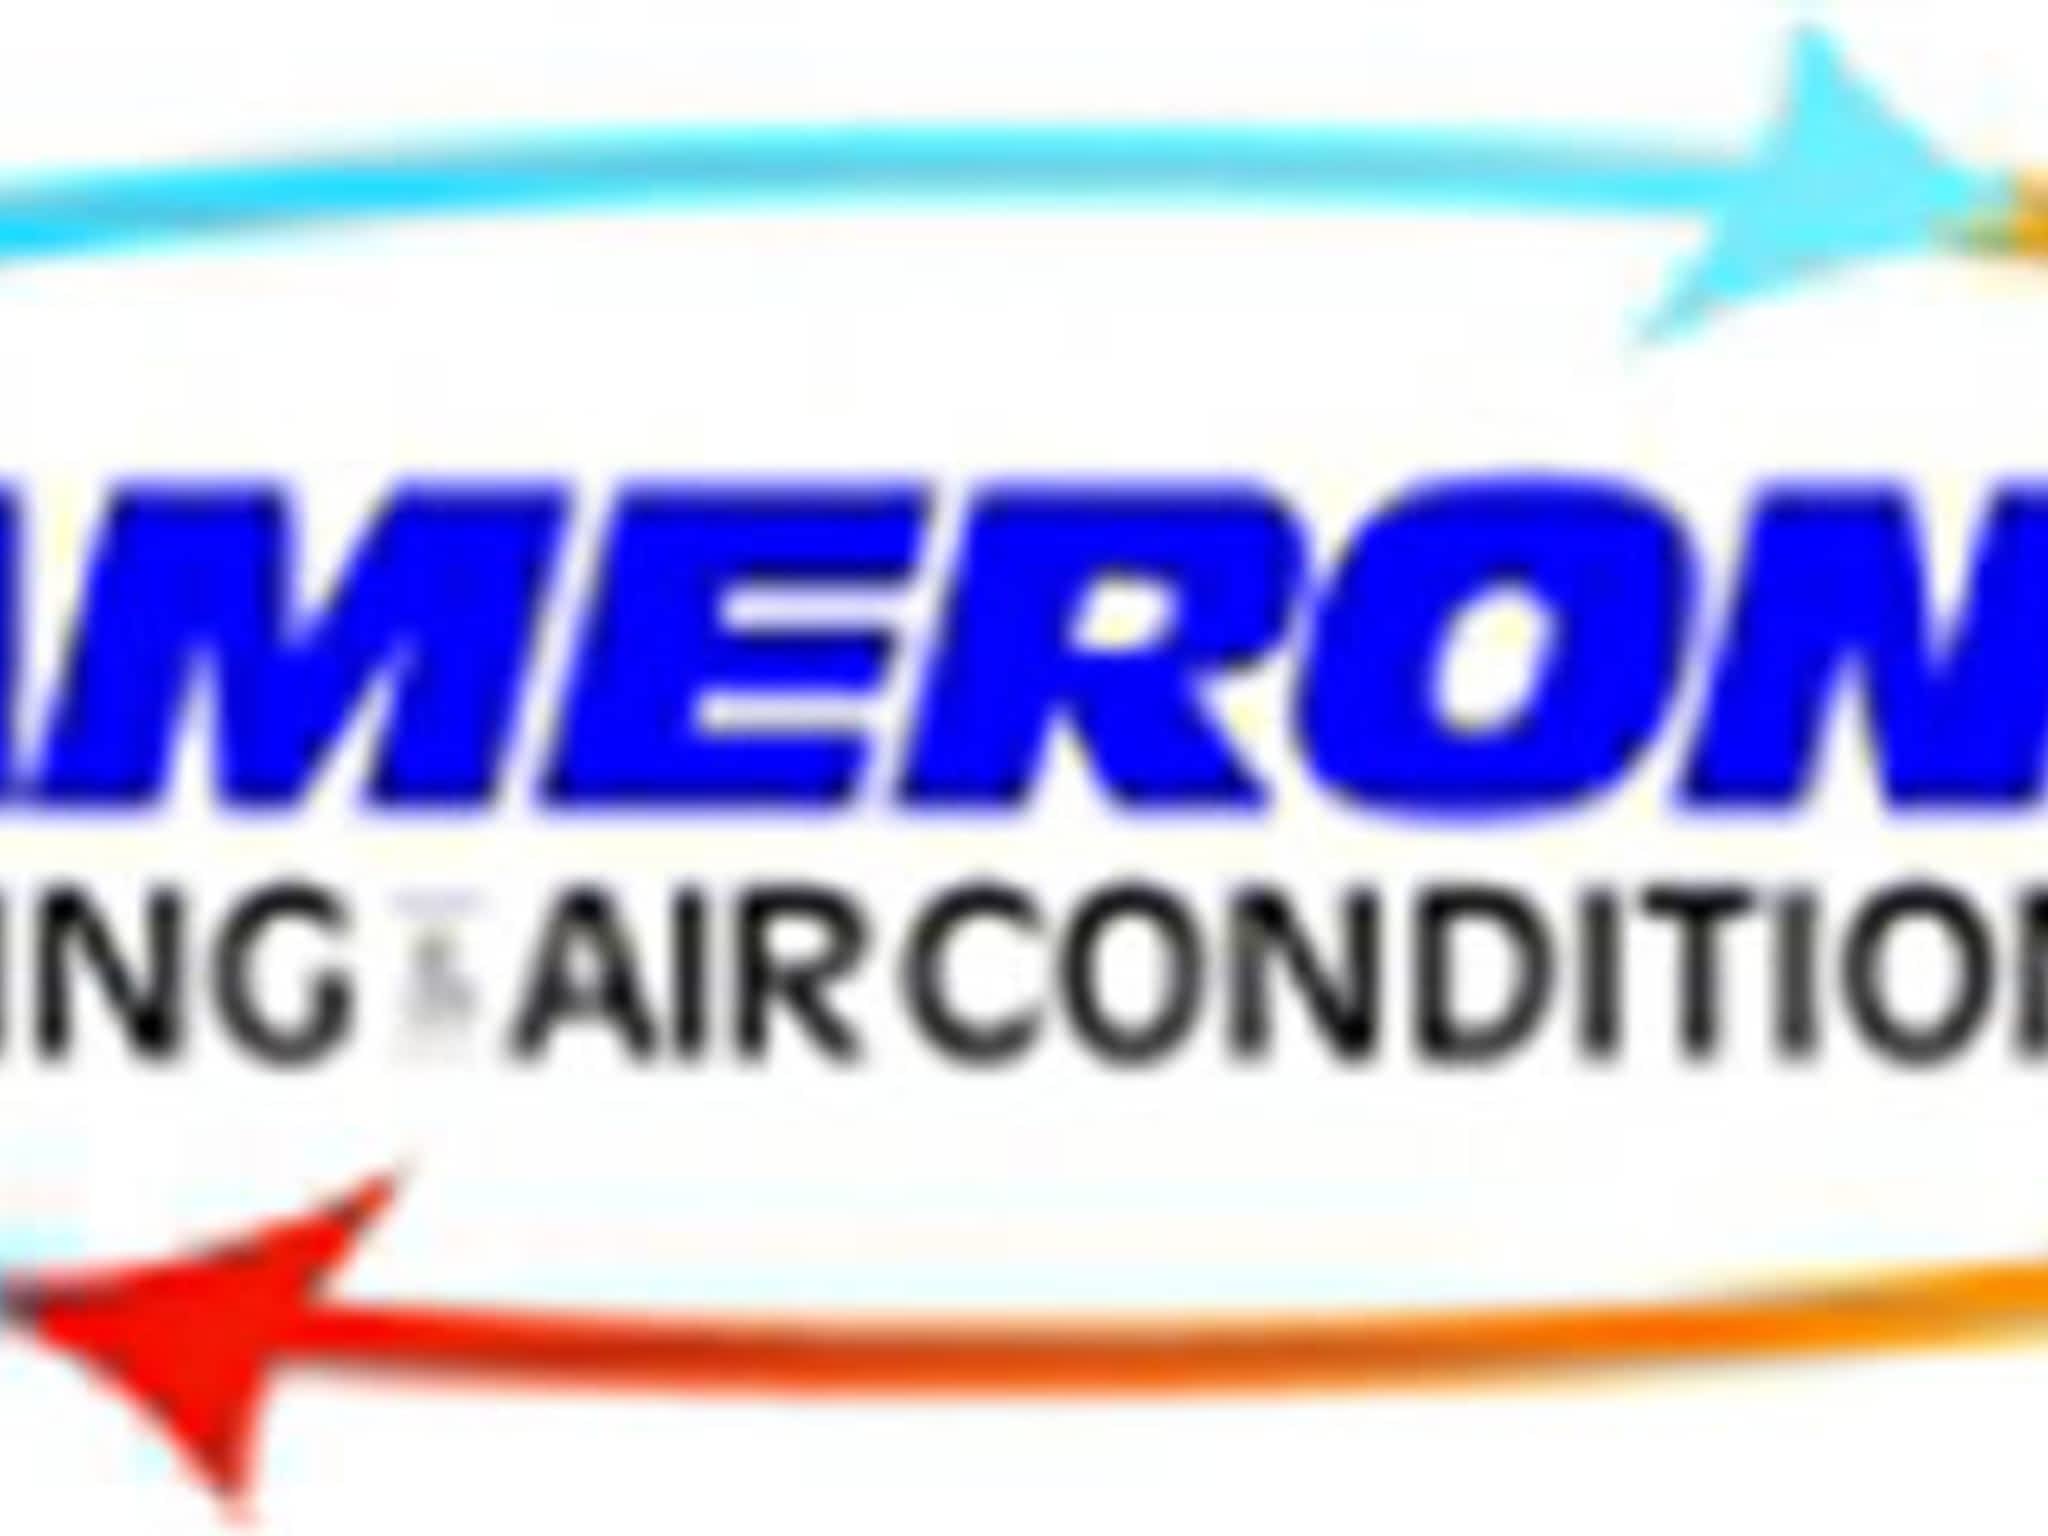 photo Cameron's Heating & Air Conditioning Ltd